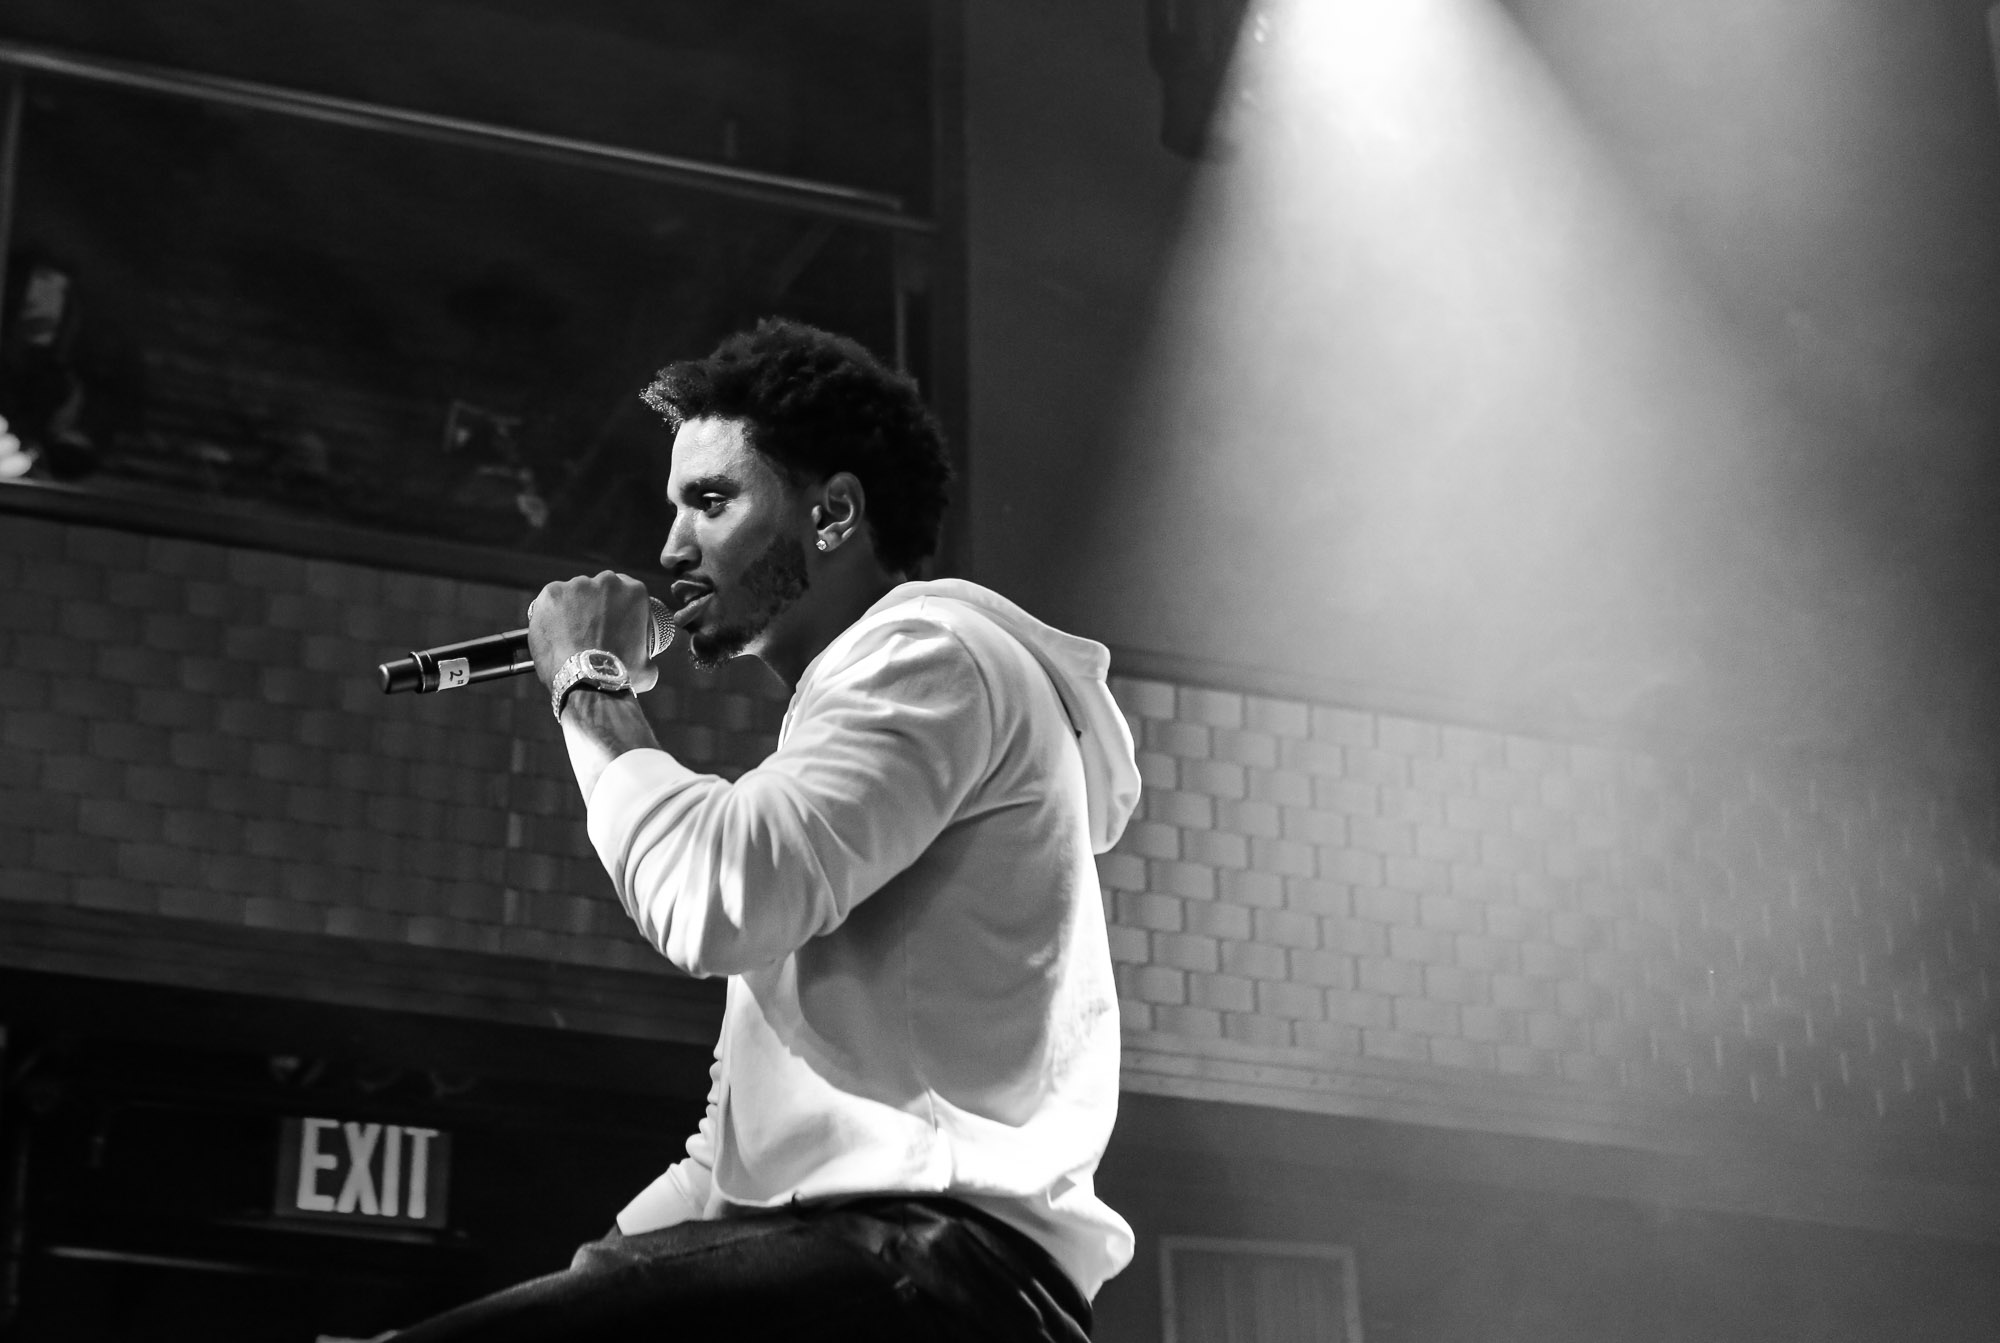 Fans Disgusted After Seeing Video of Trey Songz Sharing Spit With 2 Women